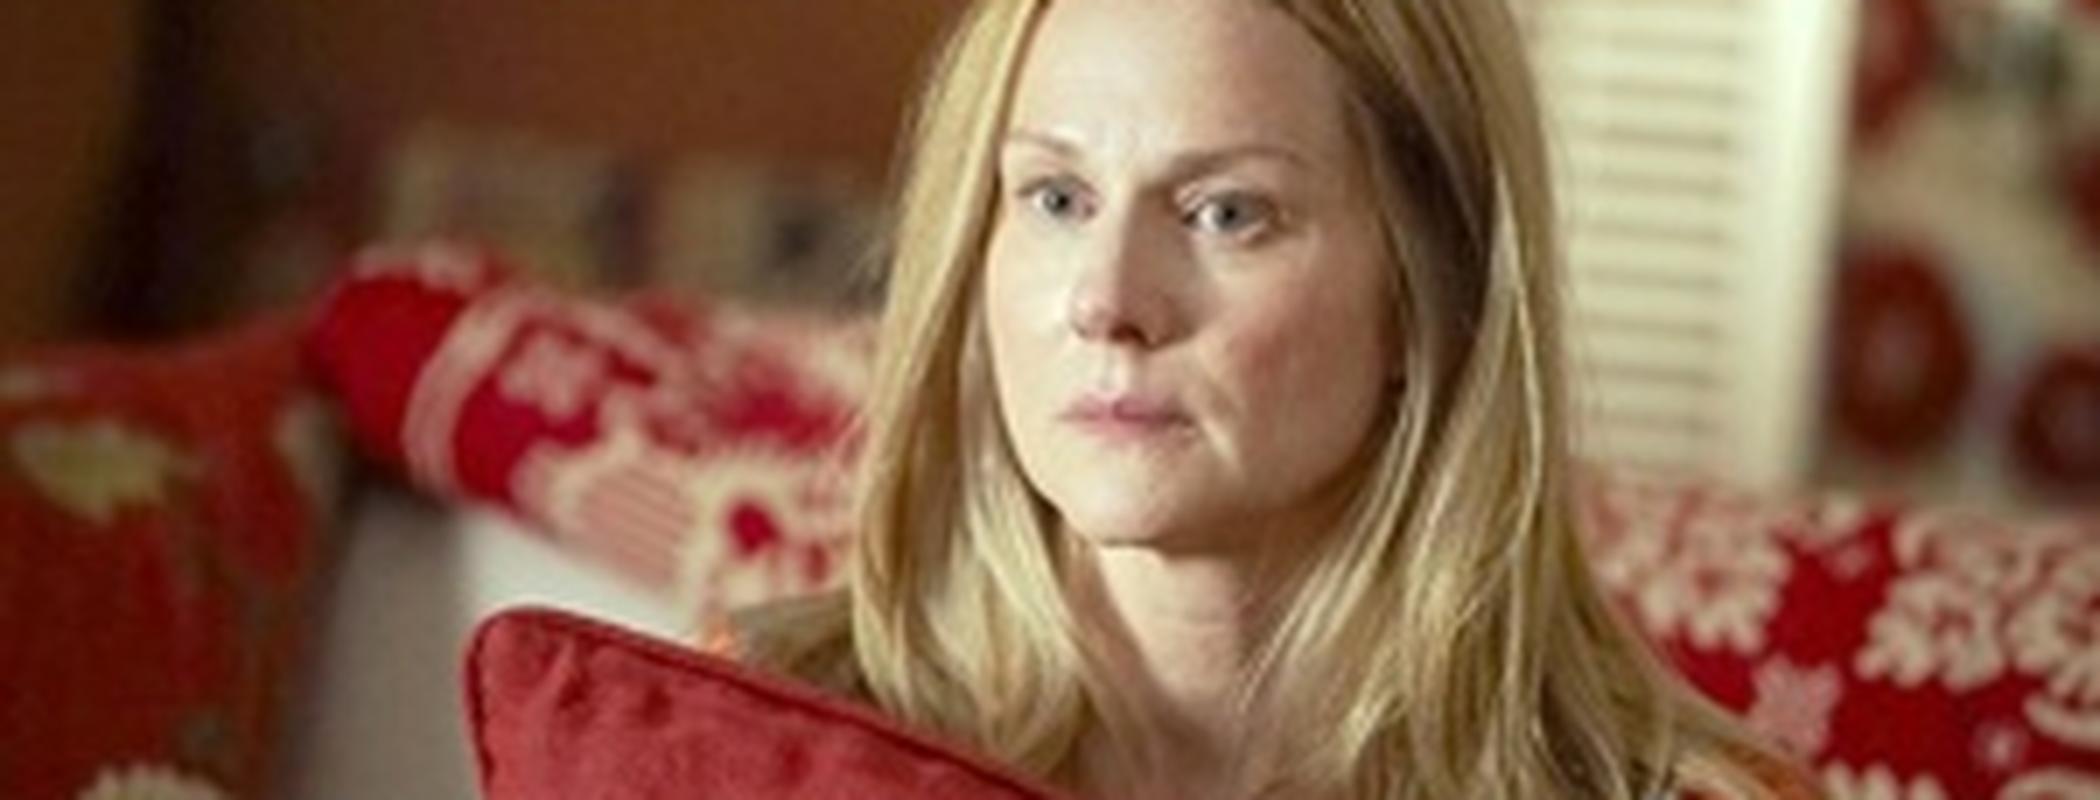 Laura Linney In Showtime's Cancer Comedy The New York Times, 59% OFF